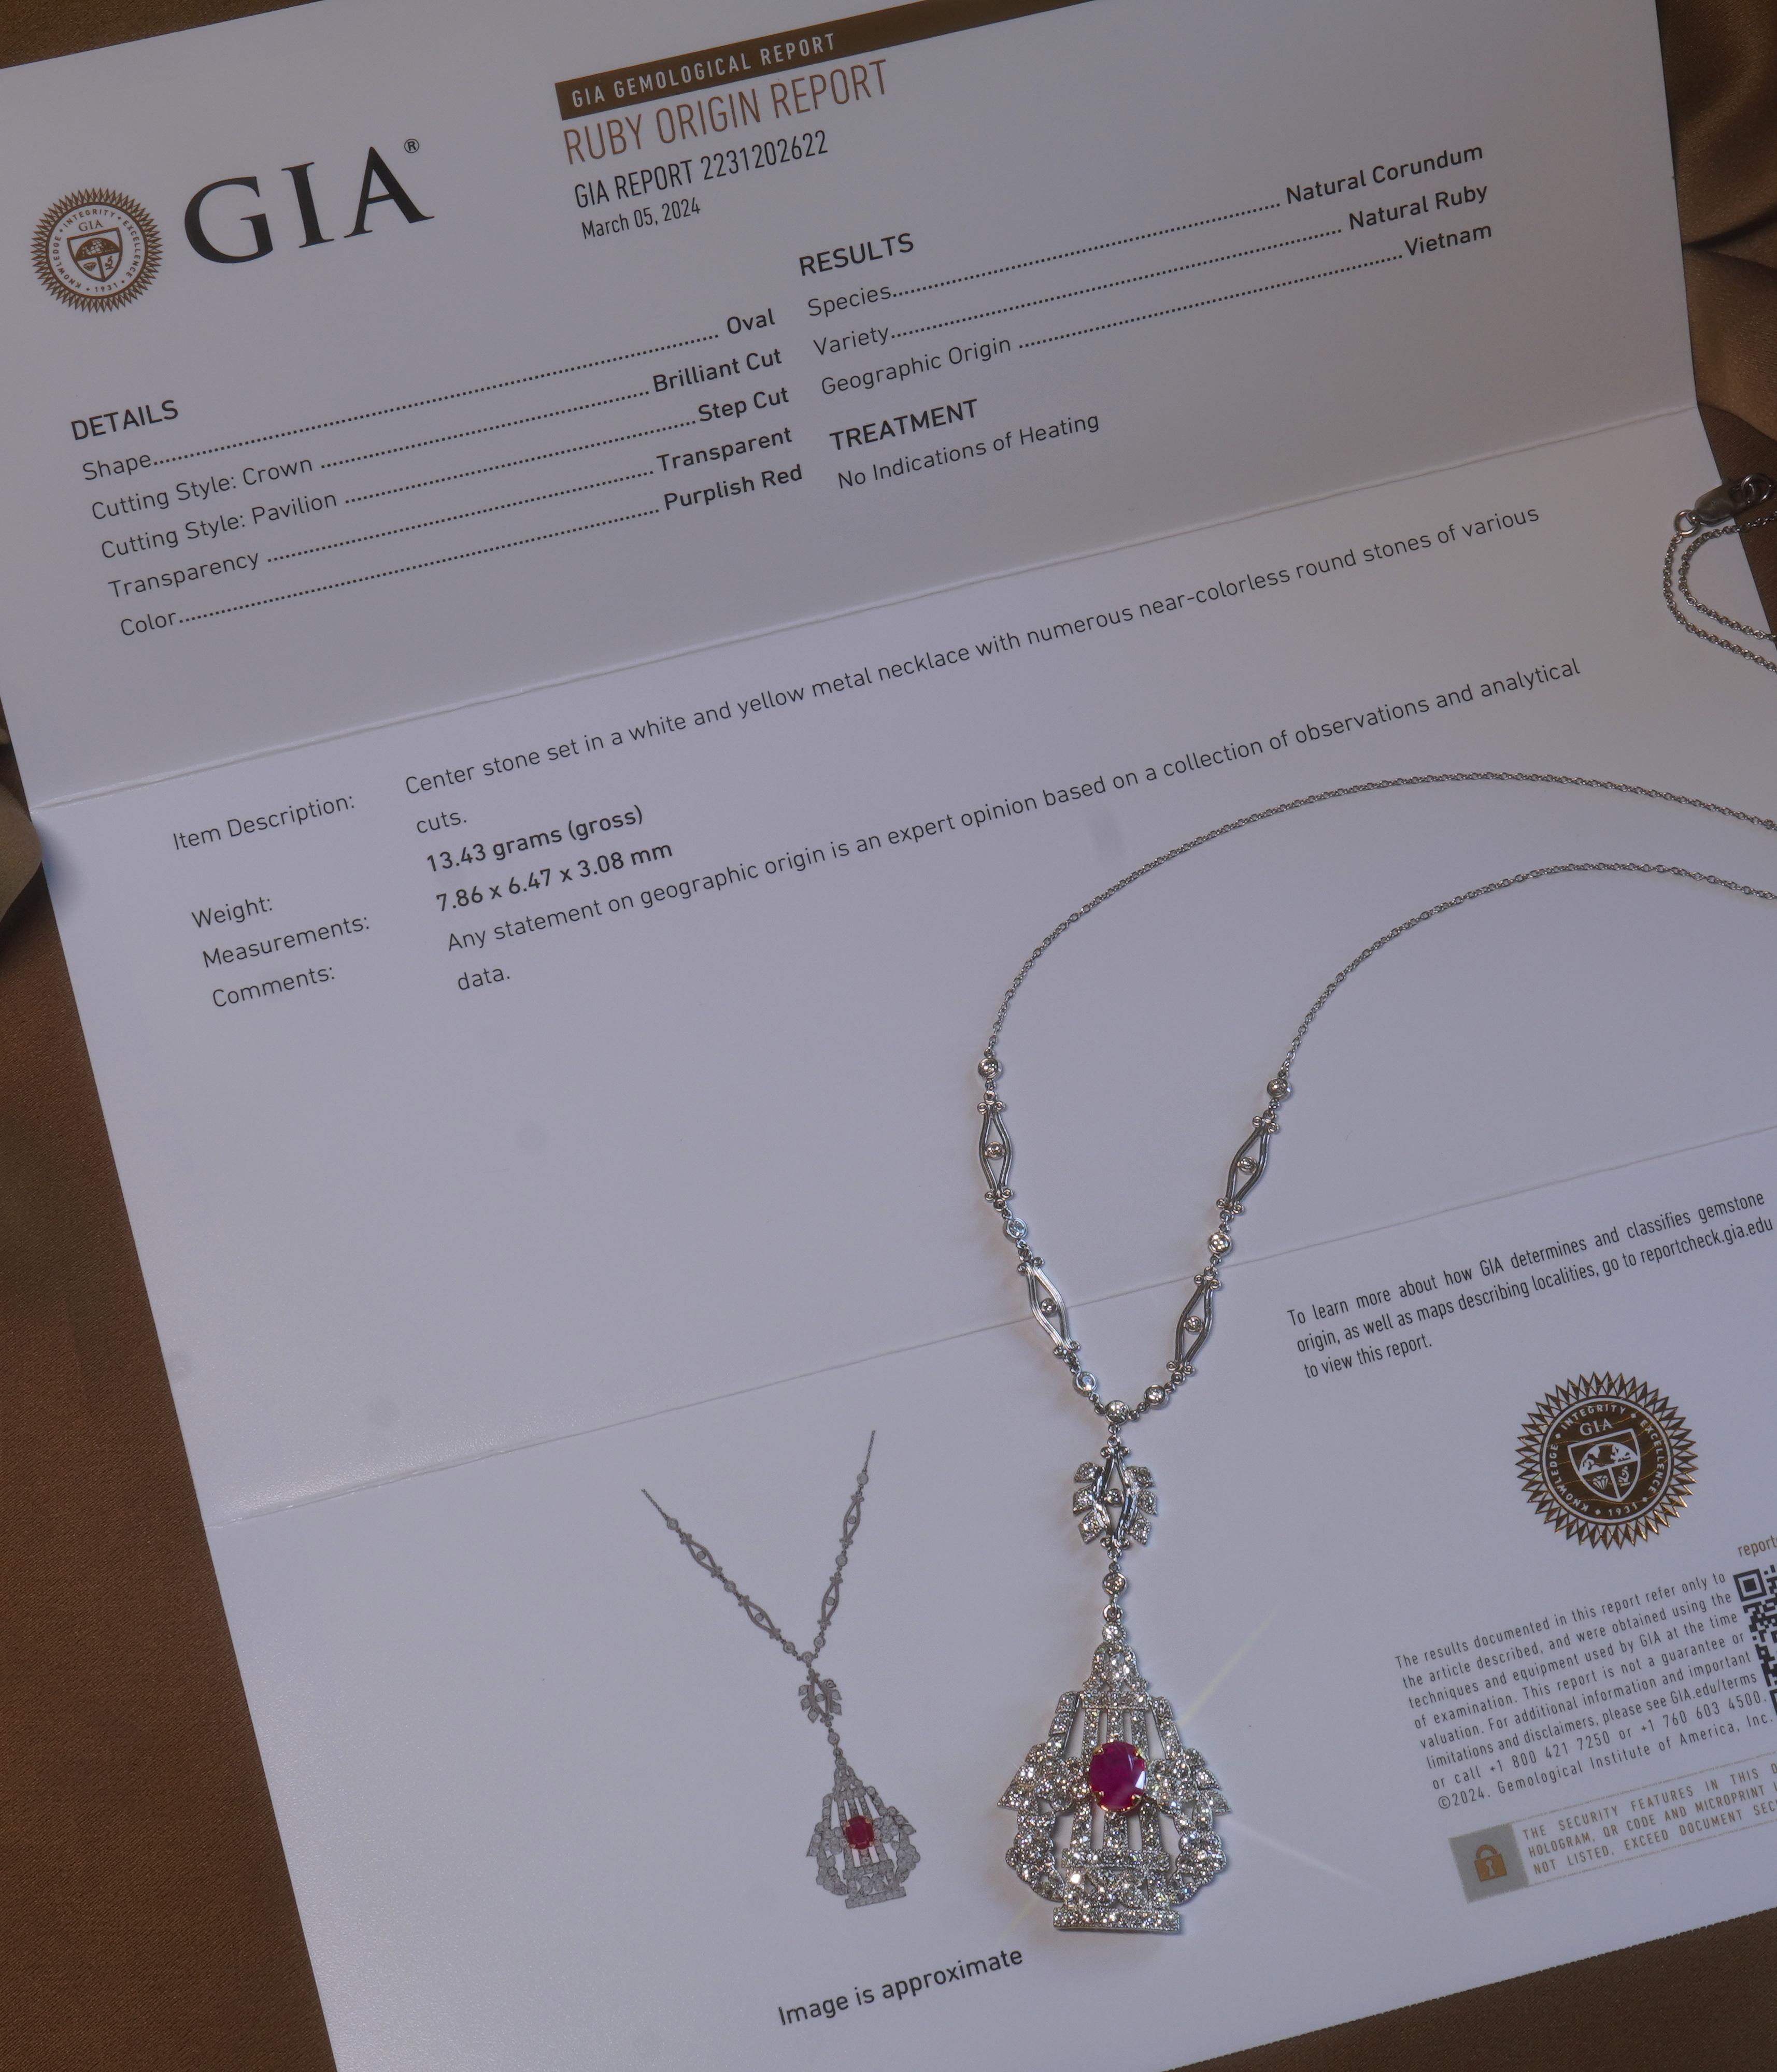 Old South Jewels proudly presents GIA CERTIFIED PLATINUM NO HEAT RUBY DIAMOND 5.04 CARAT ANTIQUE NECKLACE & BOX!  Finest Untreated Ruby Crowned With 3.82 Carats of Sparkling Old Mine Diamonds.  Authentic Antique Over 150 Years Old. 

Heavy Solid